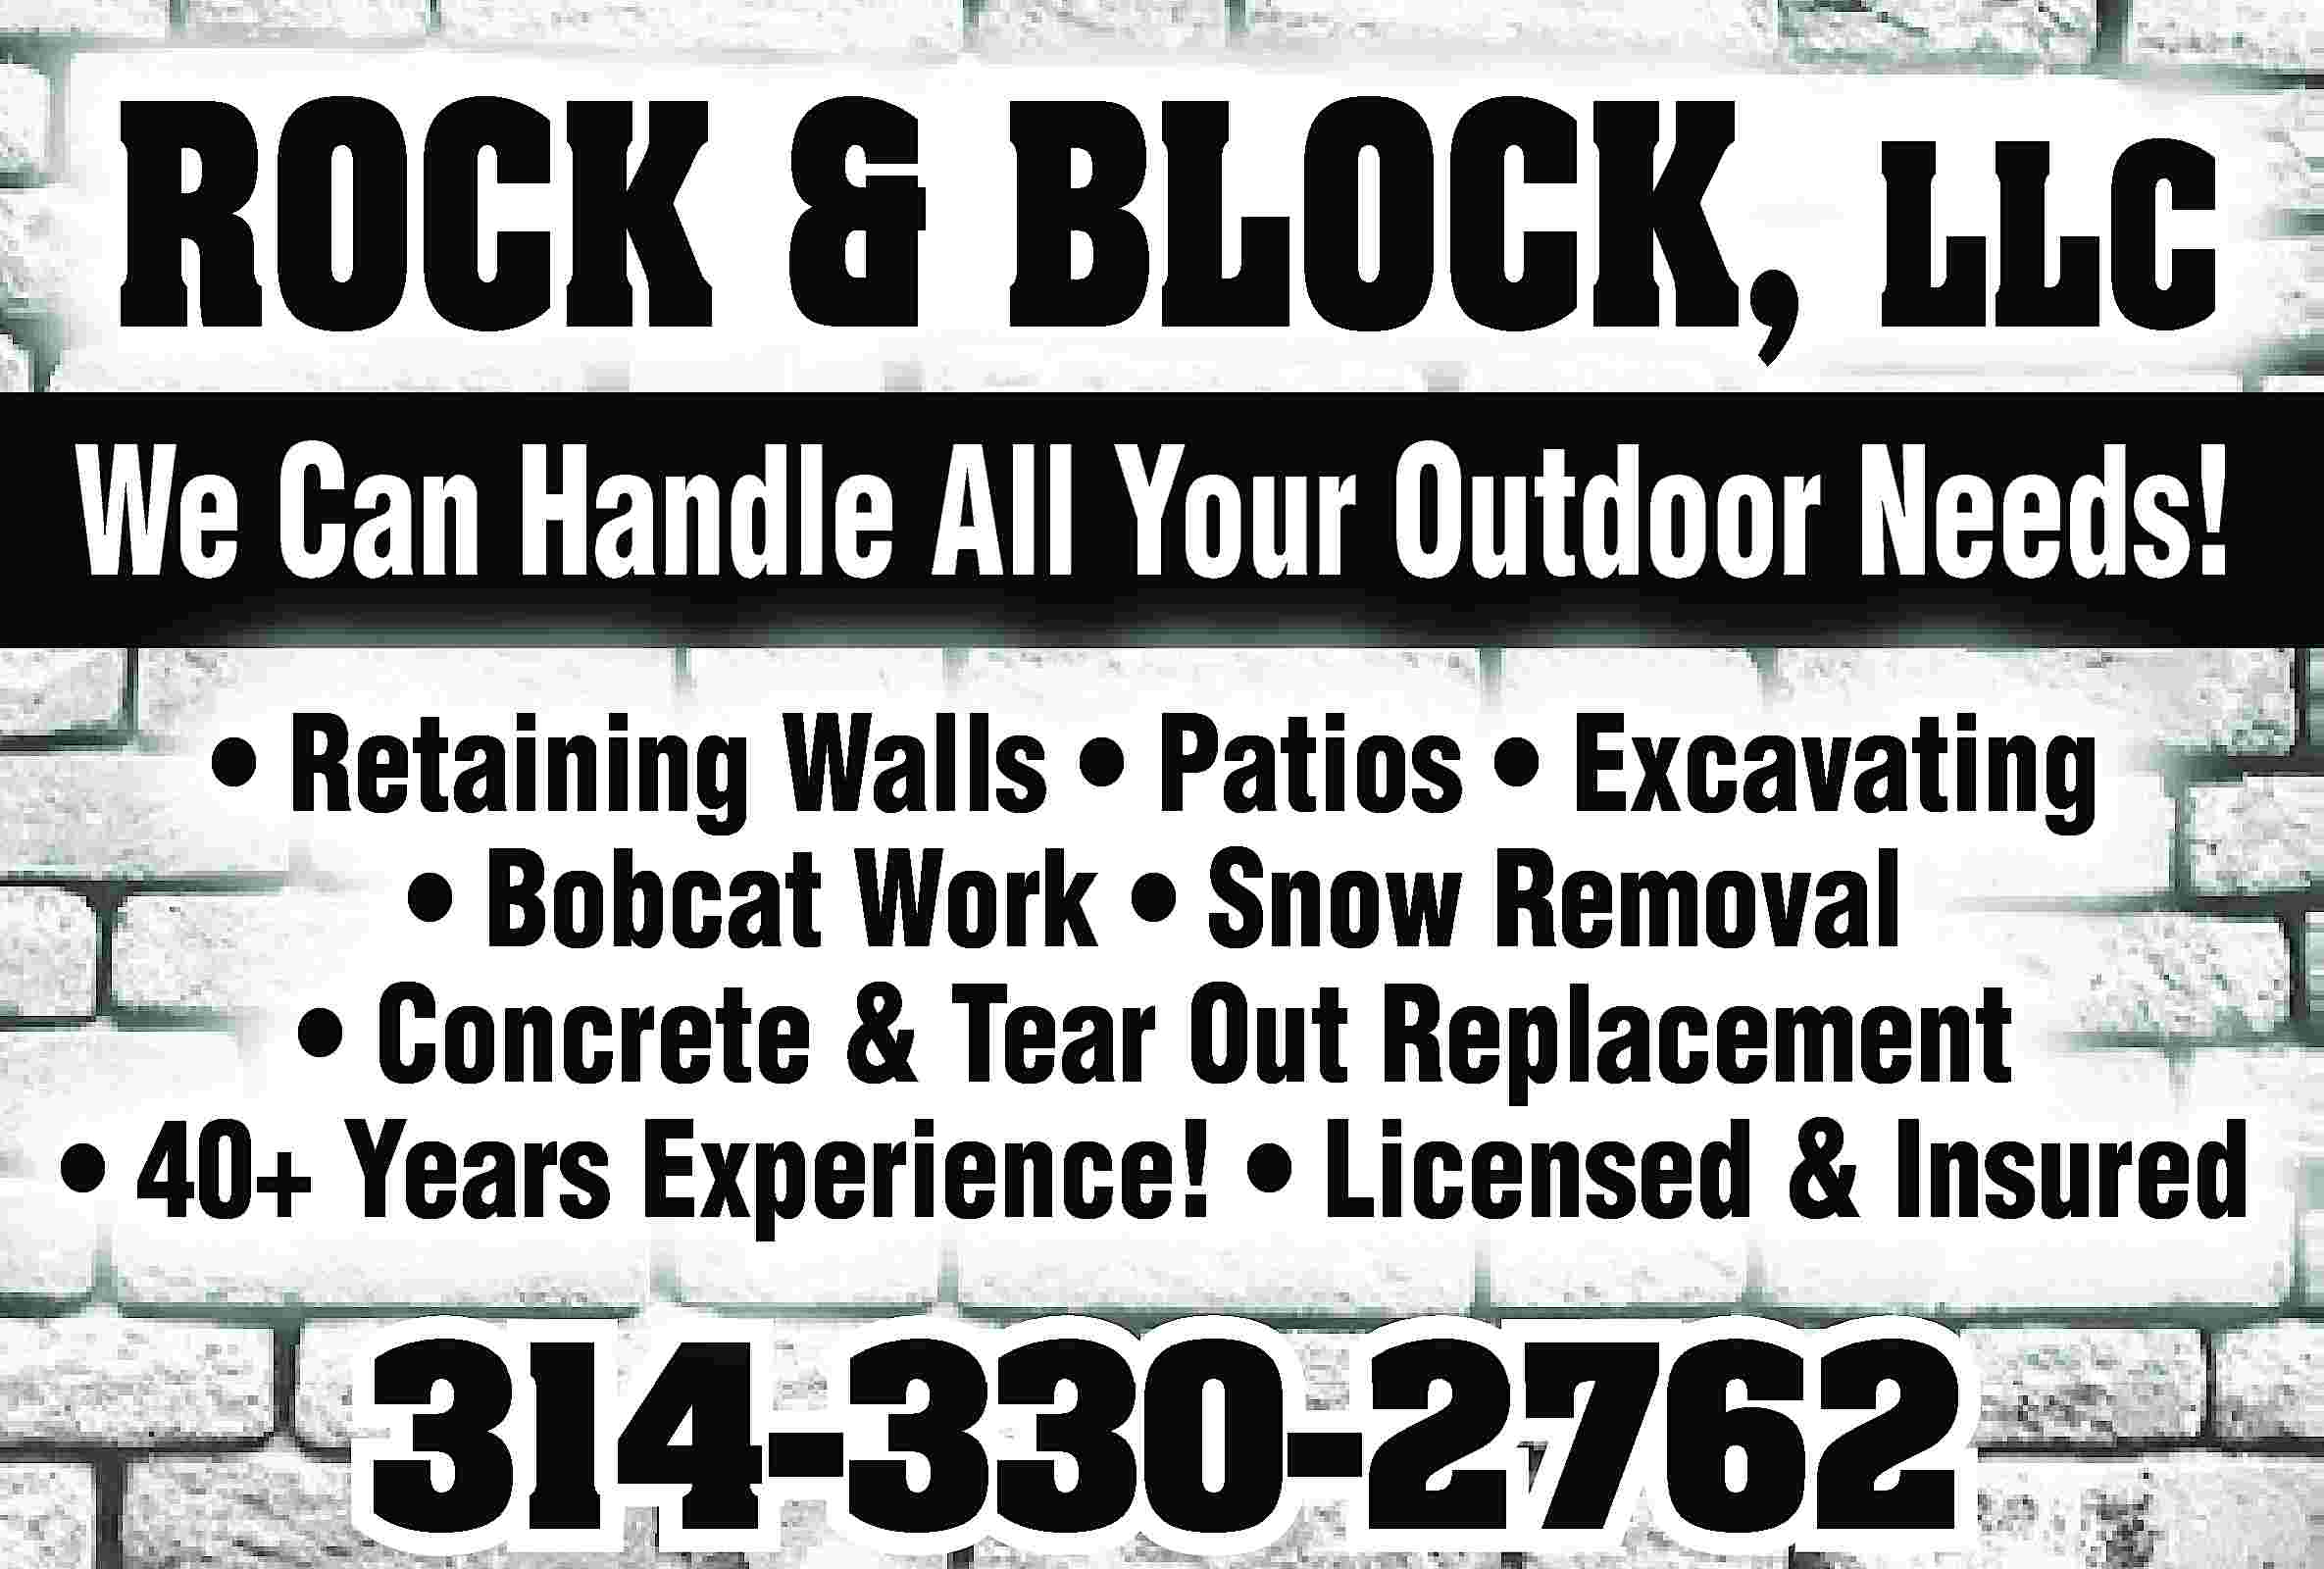 ROCK & BLOCK, LLC We  ROCK & BLOCK, LLC We Can Handle All Your Outdoor Needs! • Retaining Walls • Patios • Excavating • Bobcat Work • Snow Removal • Concrete & Tear Out Replacement • 40+ Years Experience! • Licensed & Insured 314-330-2762